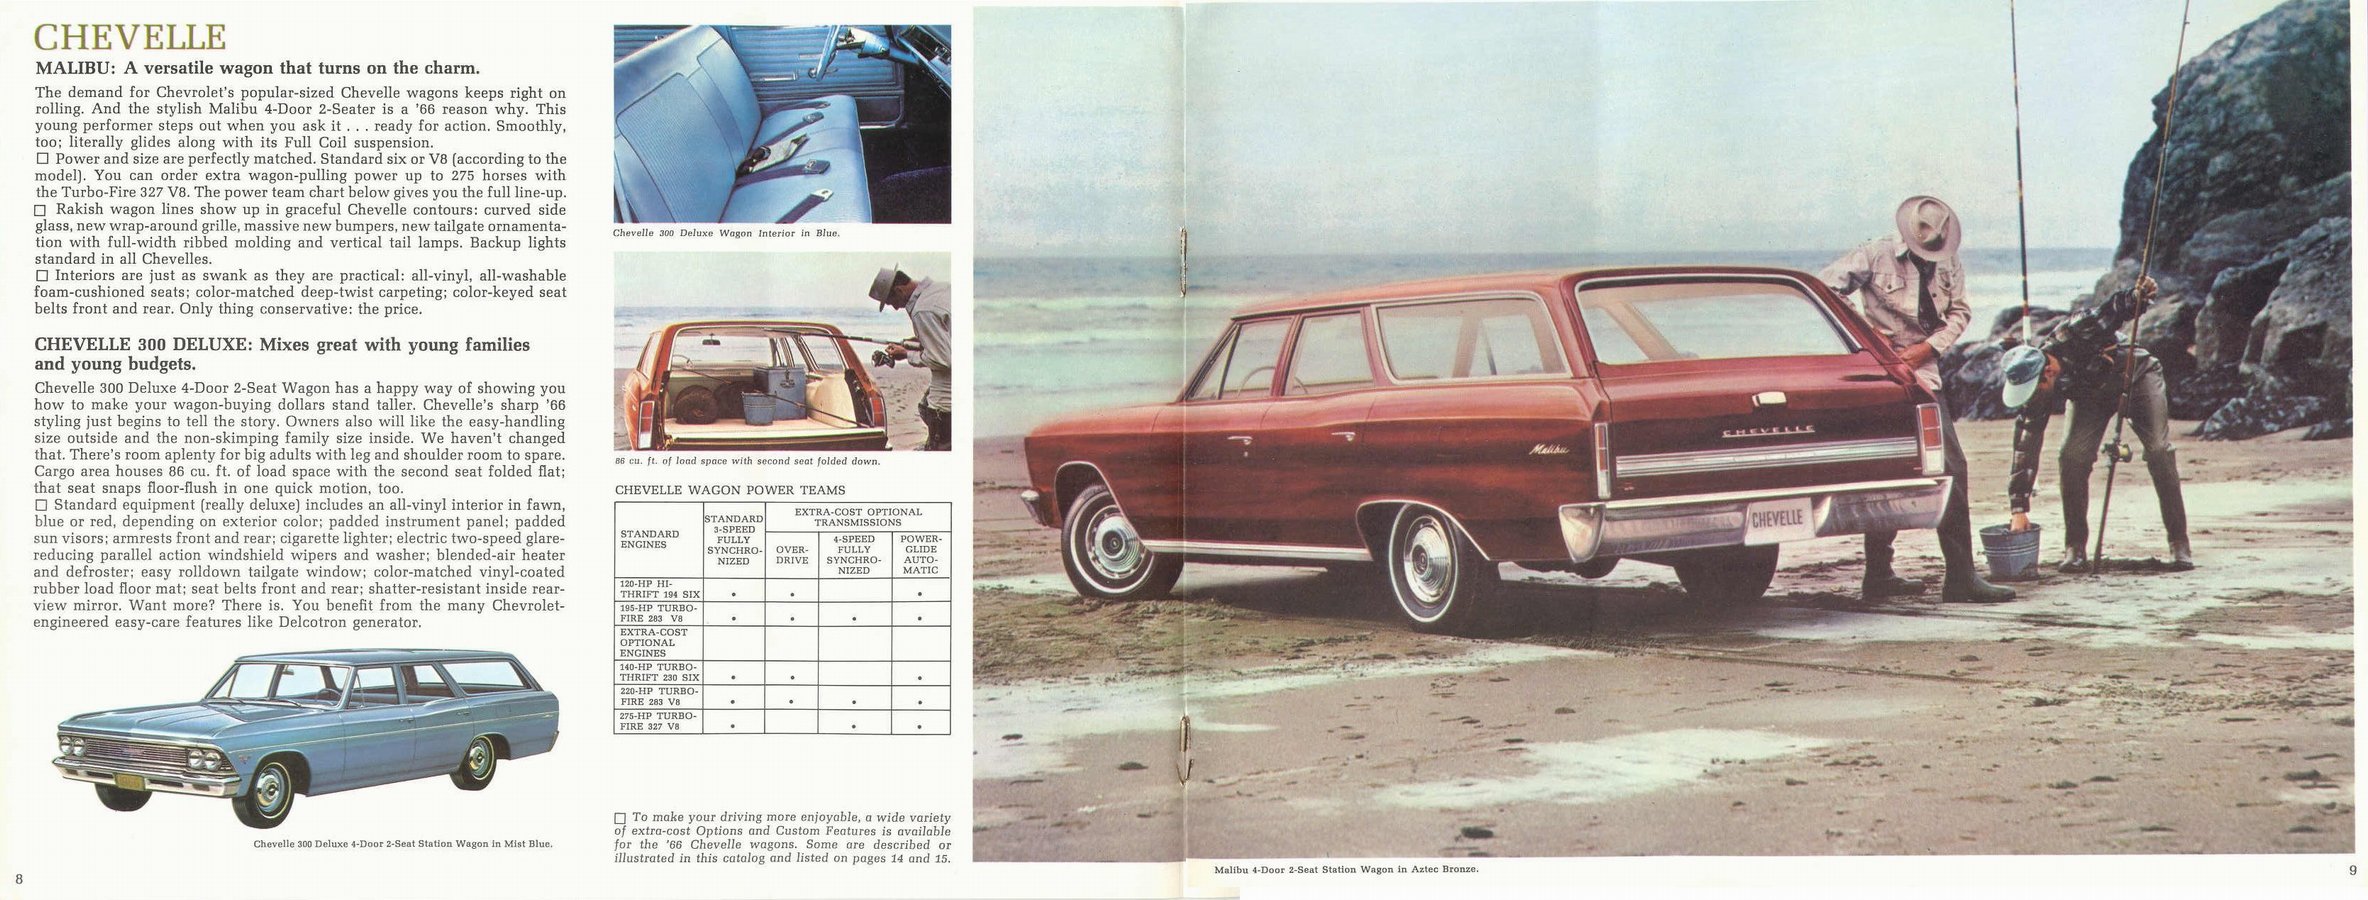 1966 Chevrolet Wagons Brochure Page 11